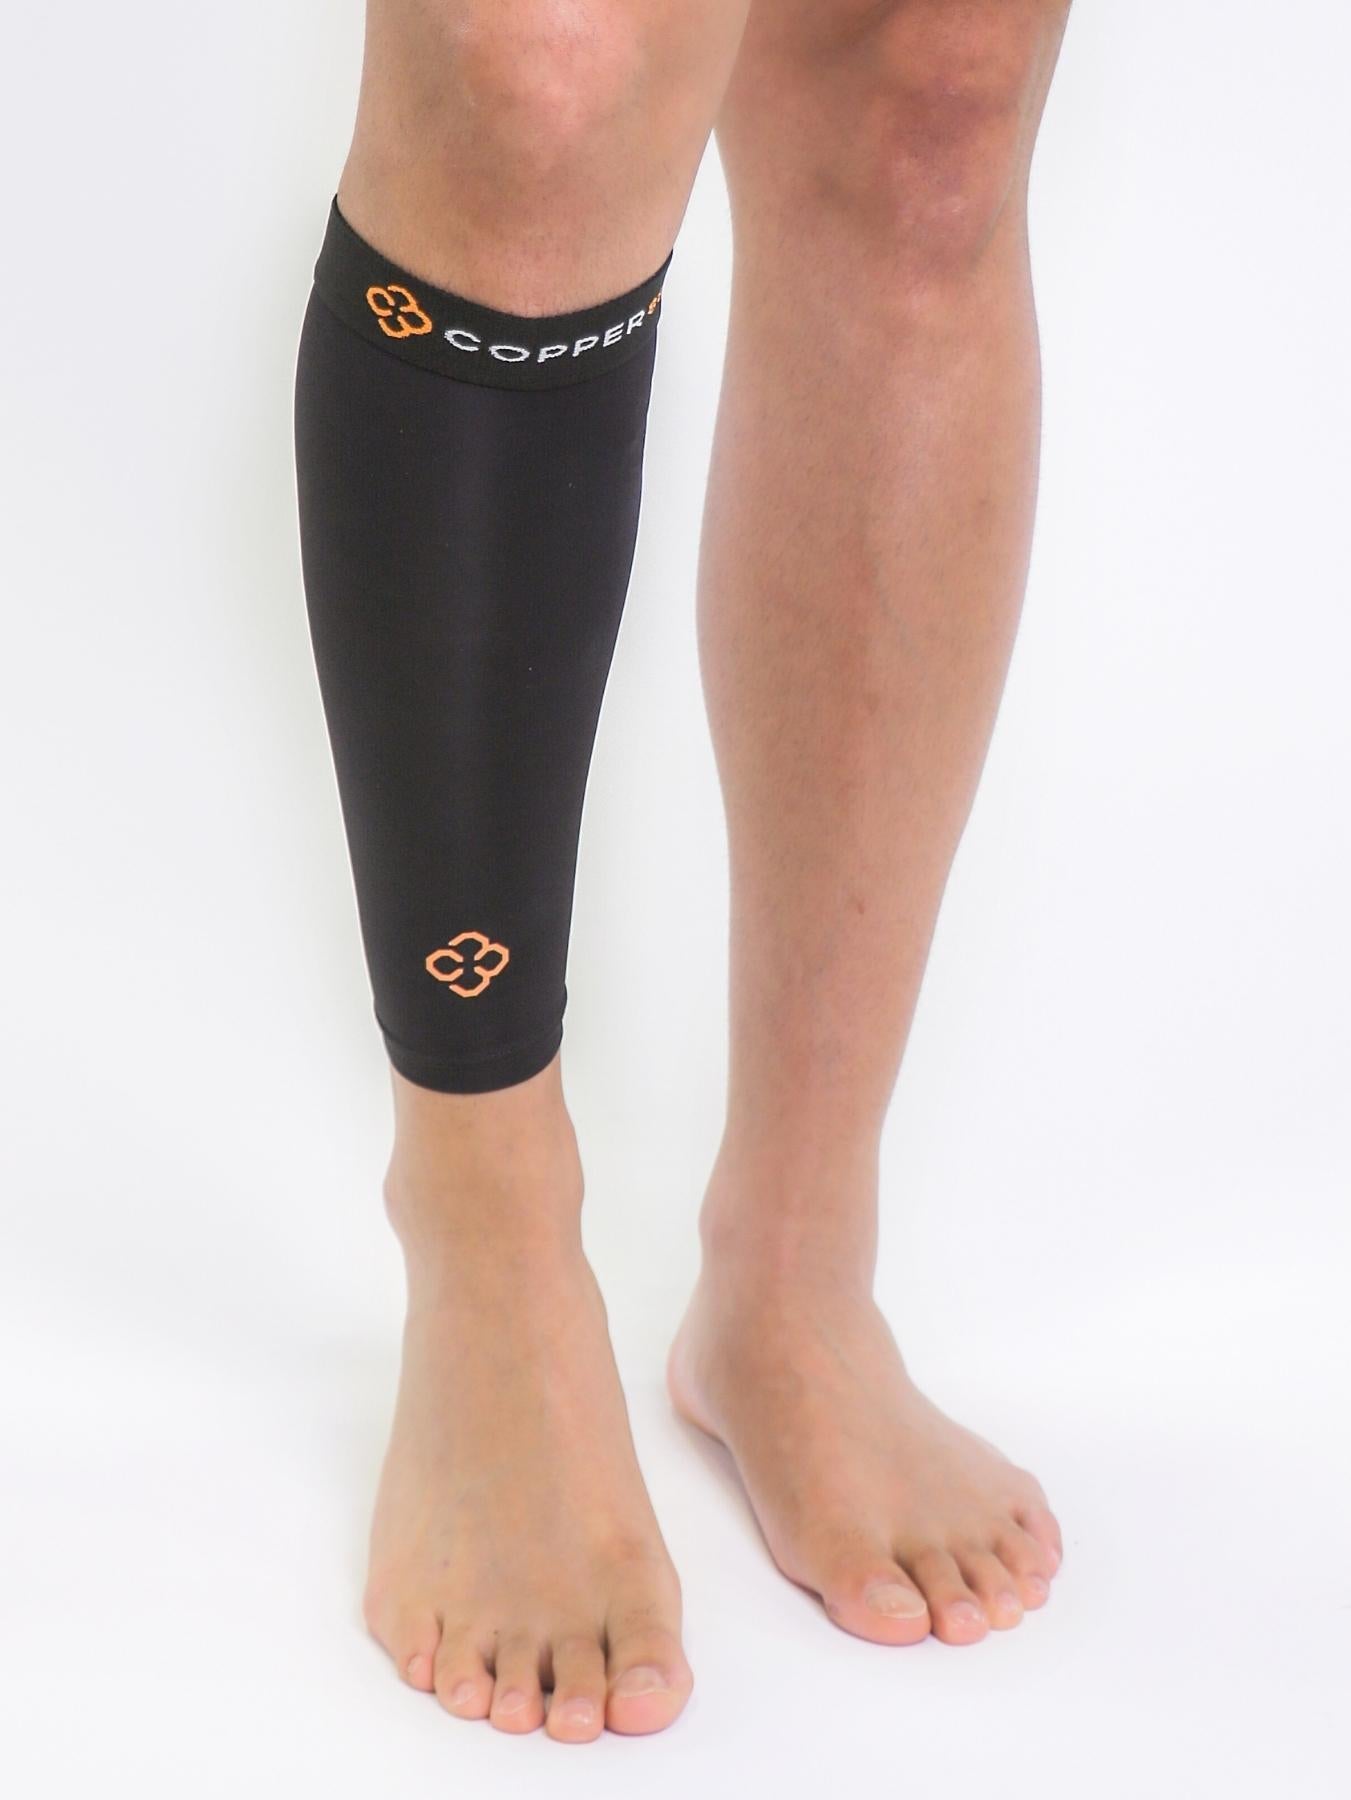 TOMMIE COPPER - SPORT COMPRESSION CALF SLEEVE - SIZE SMALL/MEDIUM - 100%  INFUSED